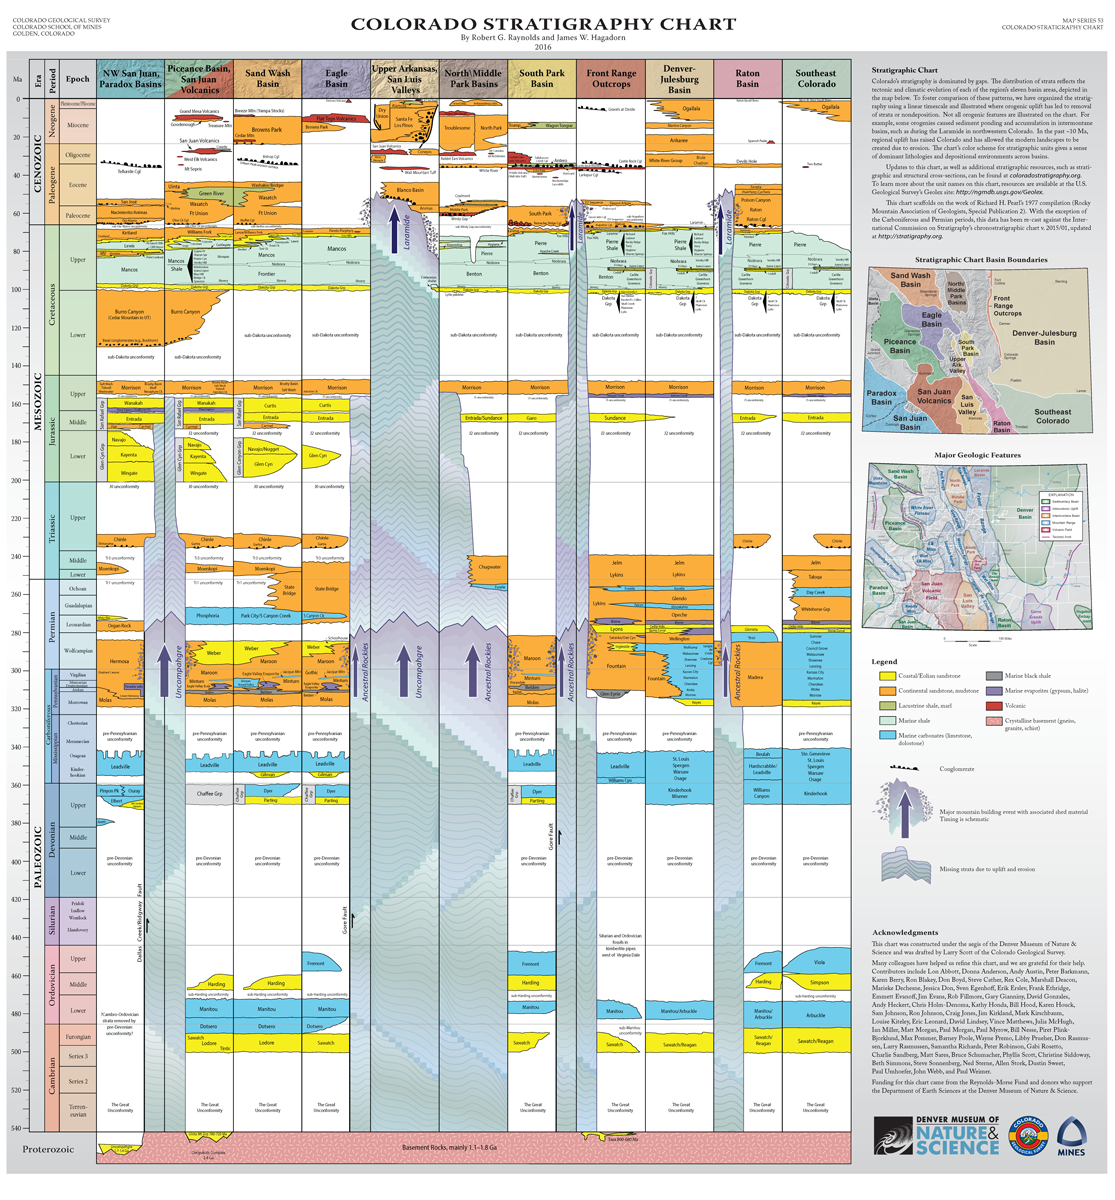 MS-53 Colorado Stratigraphy Chart, from Robert Raynolds and James Hagadorn, 2017. Credit: Colorado Geological Survey and the Denver Museum of Nature and Science.